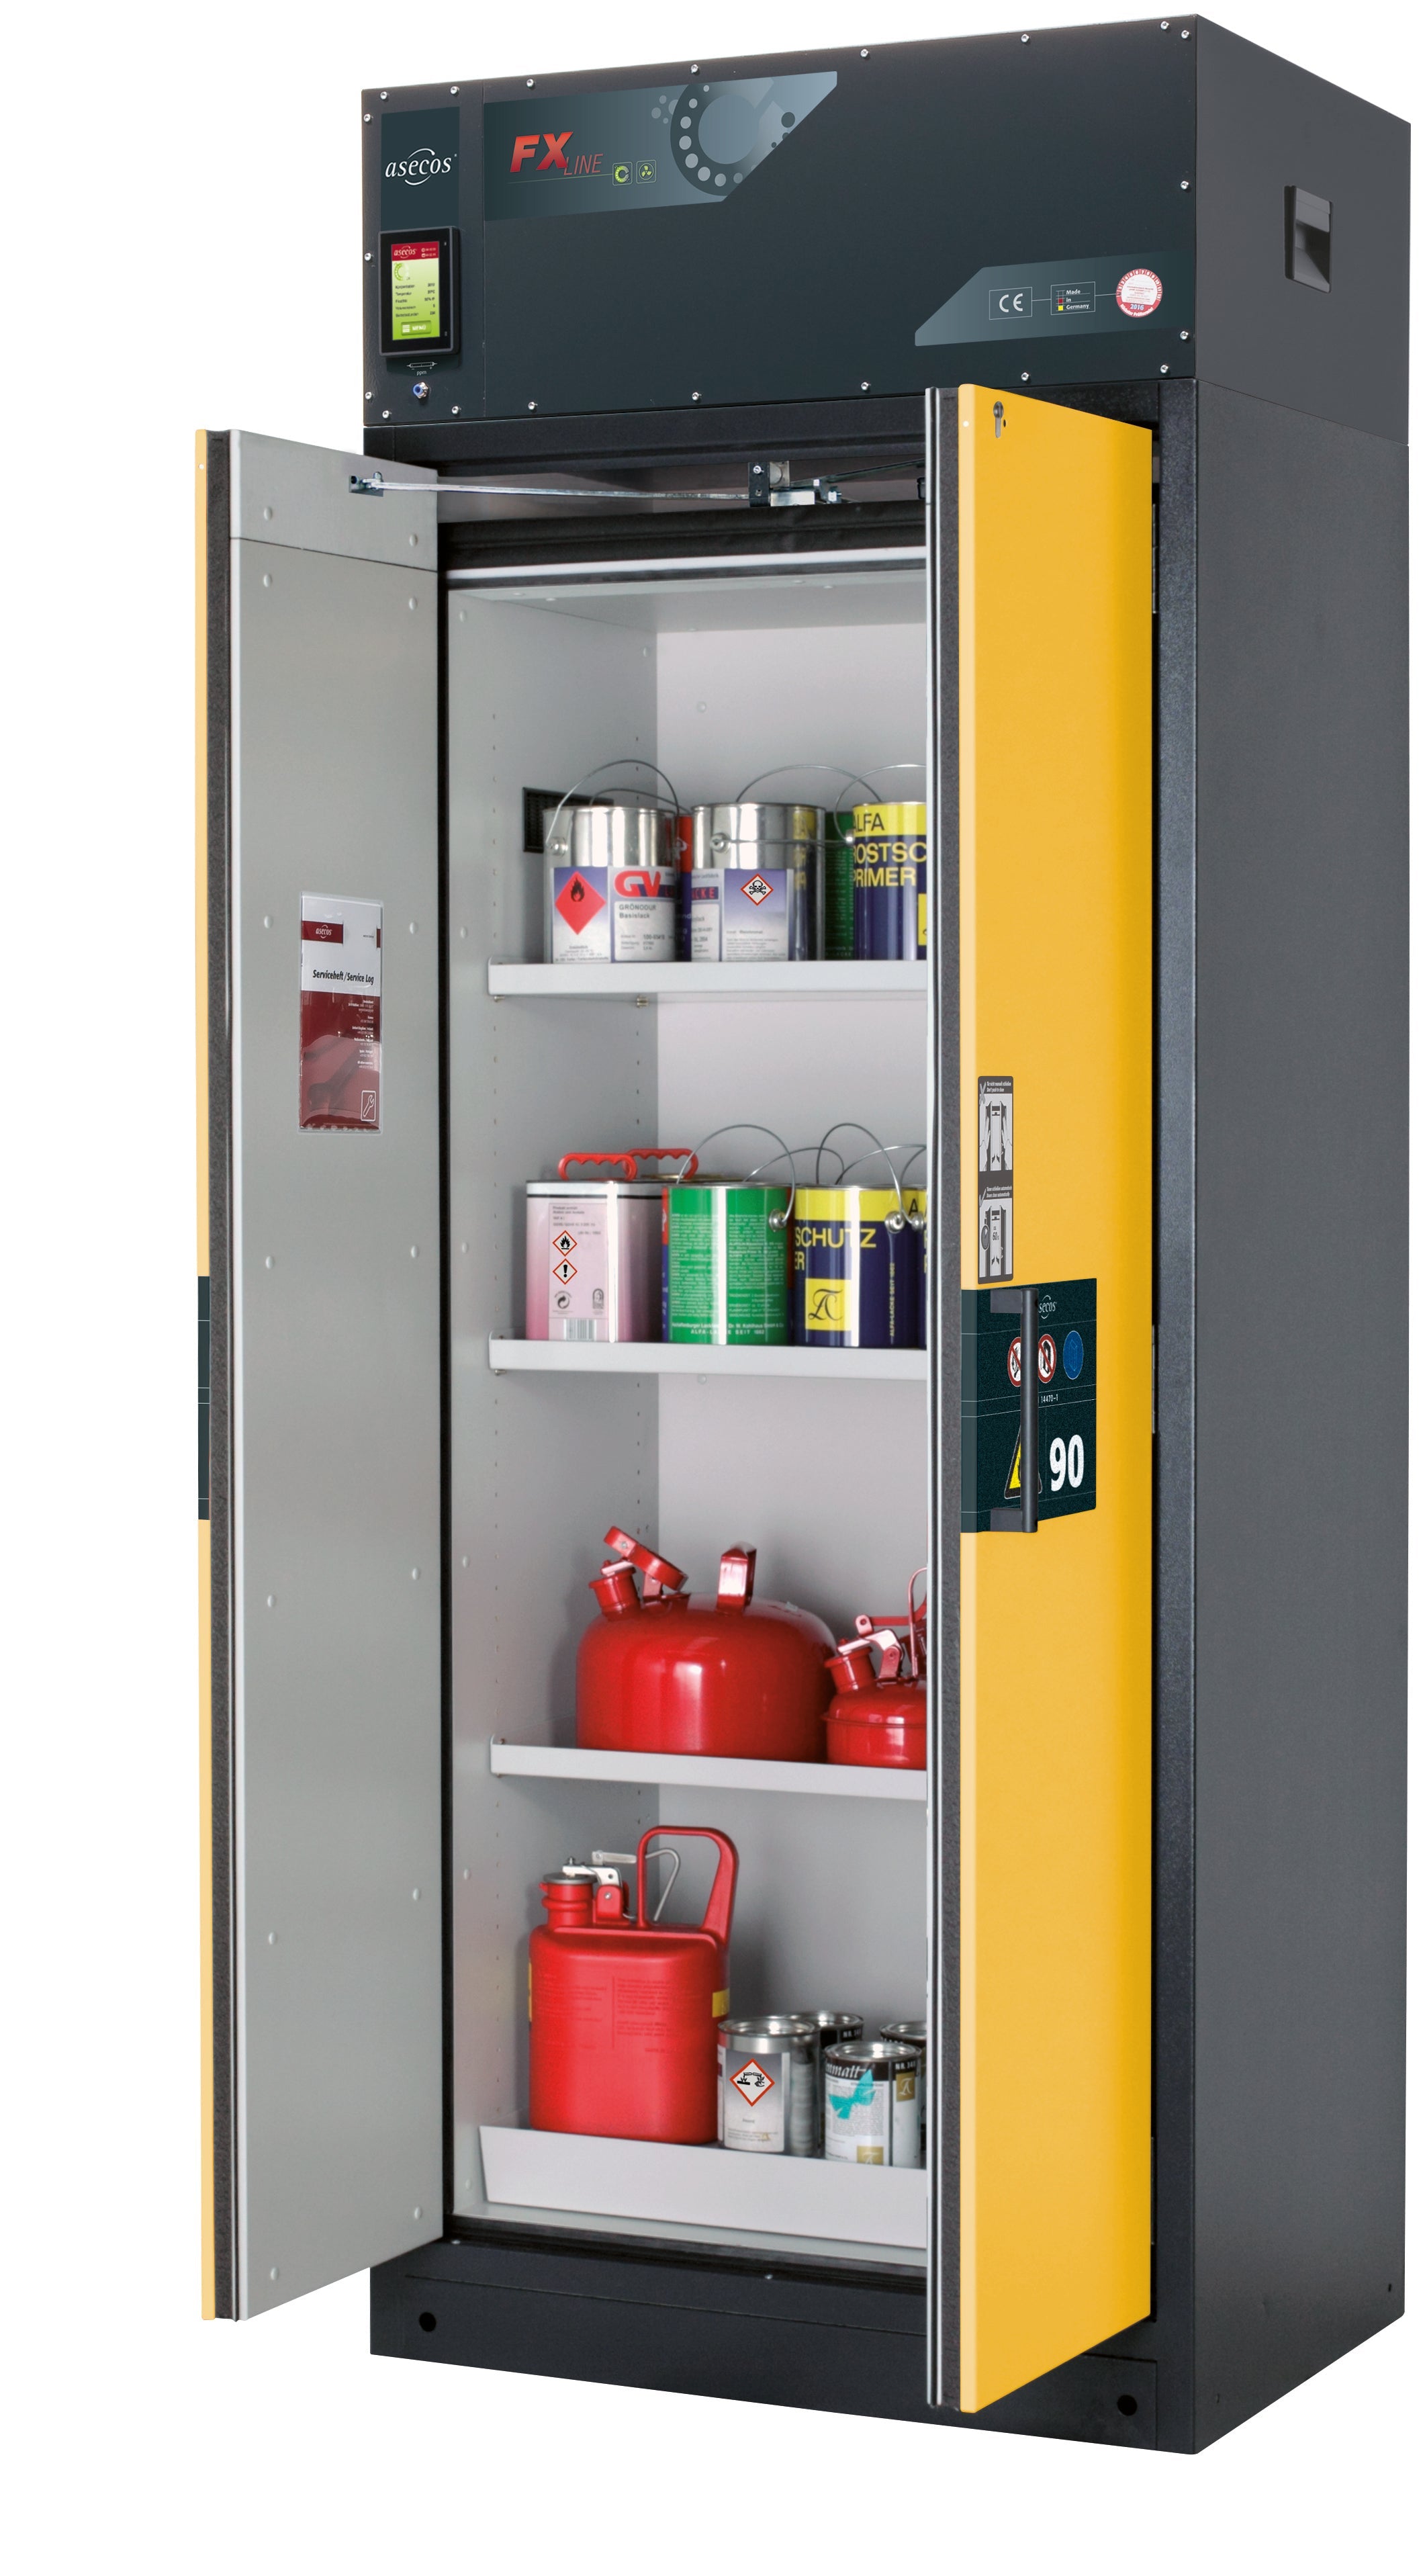 Type 90 recirculating air filter cabinet FX-PEGASUS-90 model FX90.229.090.WDAC in safety yellow RAL 1004 with 3x standard shelves (sheet steel)